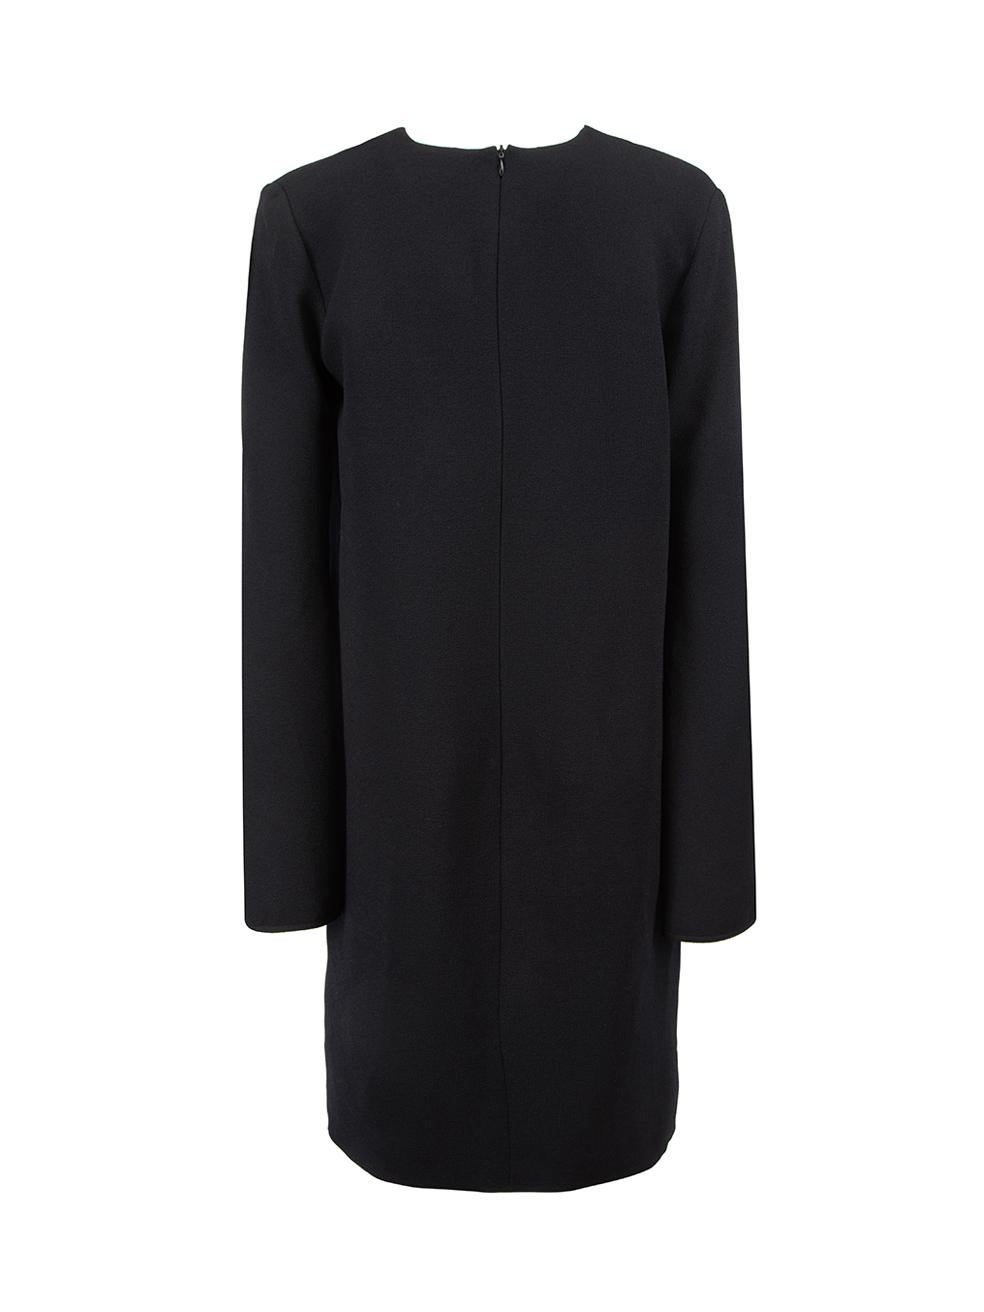 Ellery Black Flared Sleeves Knee Length Dress Size M In Good Condition For Sale In London, GB